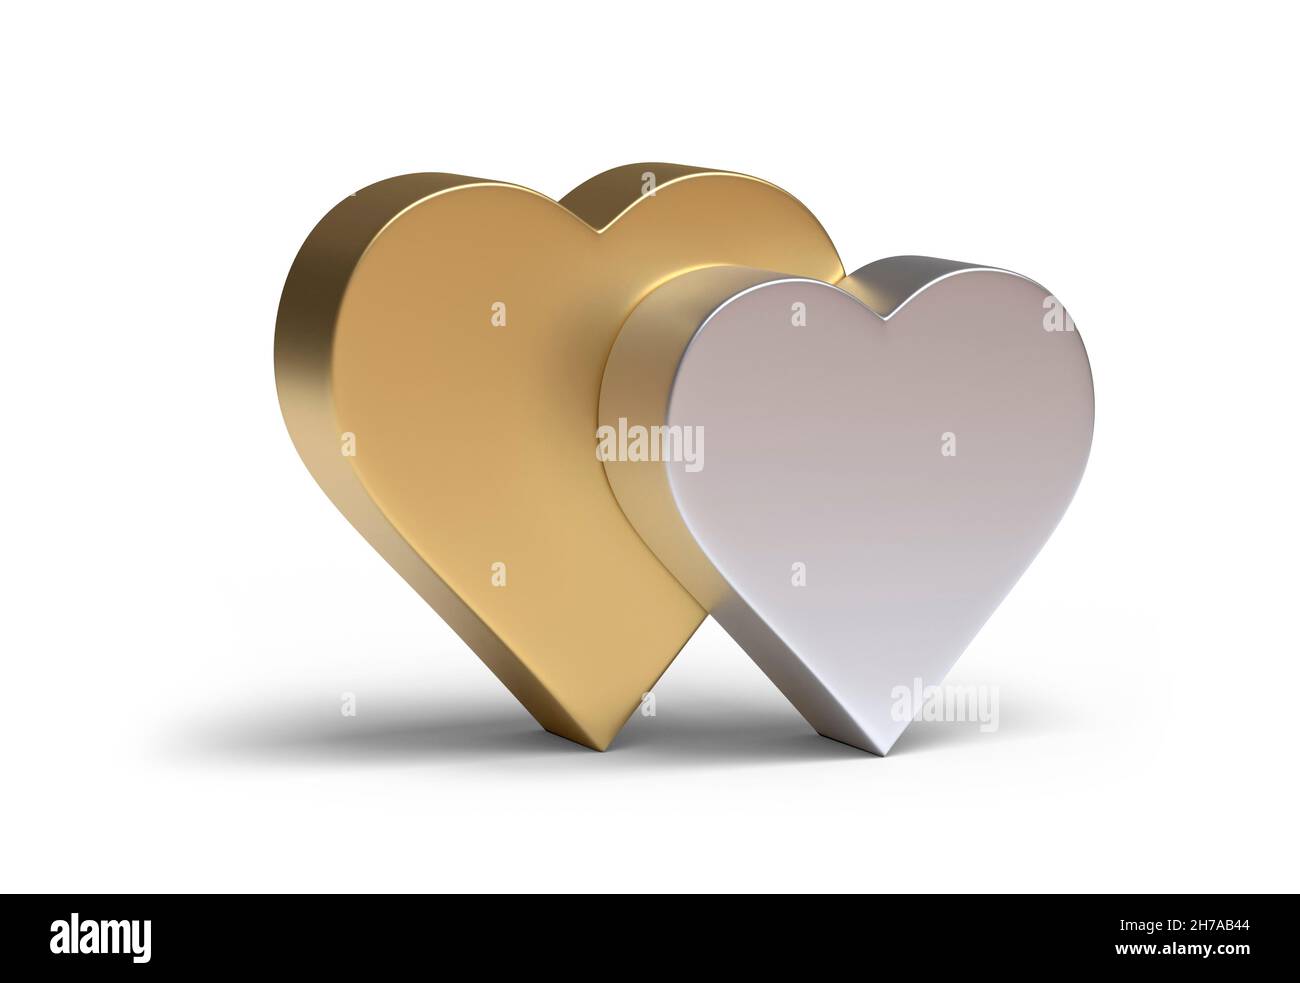 419,505 Two Hearts Images, Stock Photos, 3D objects, & Vectors